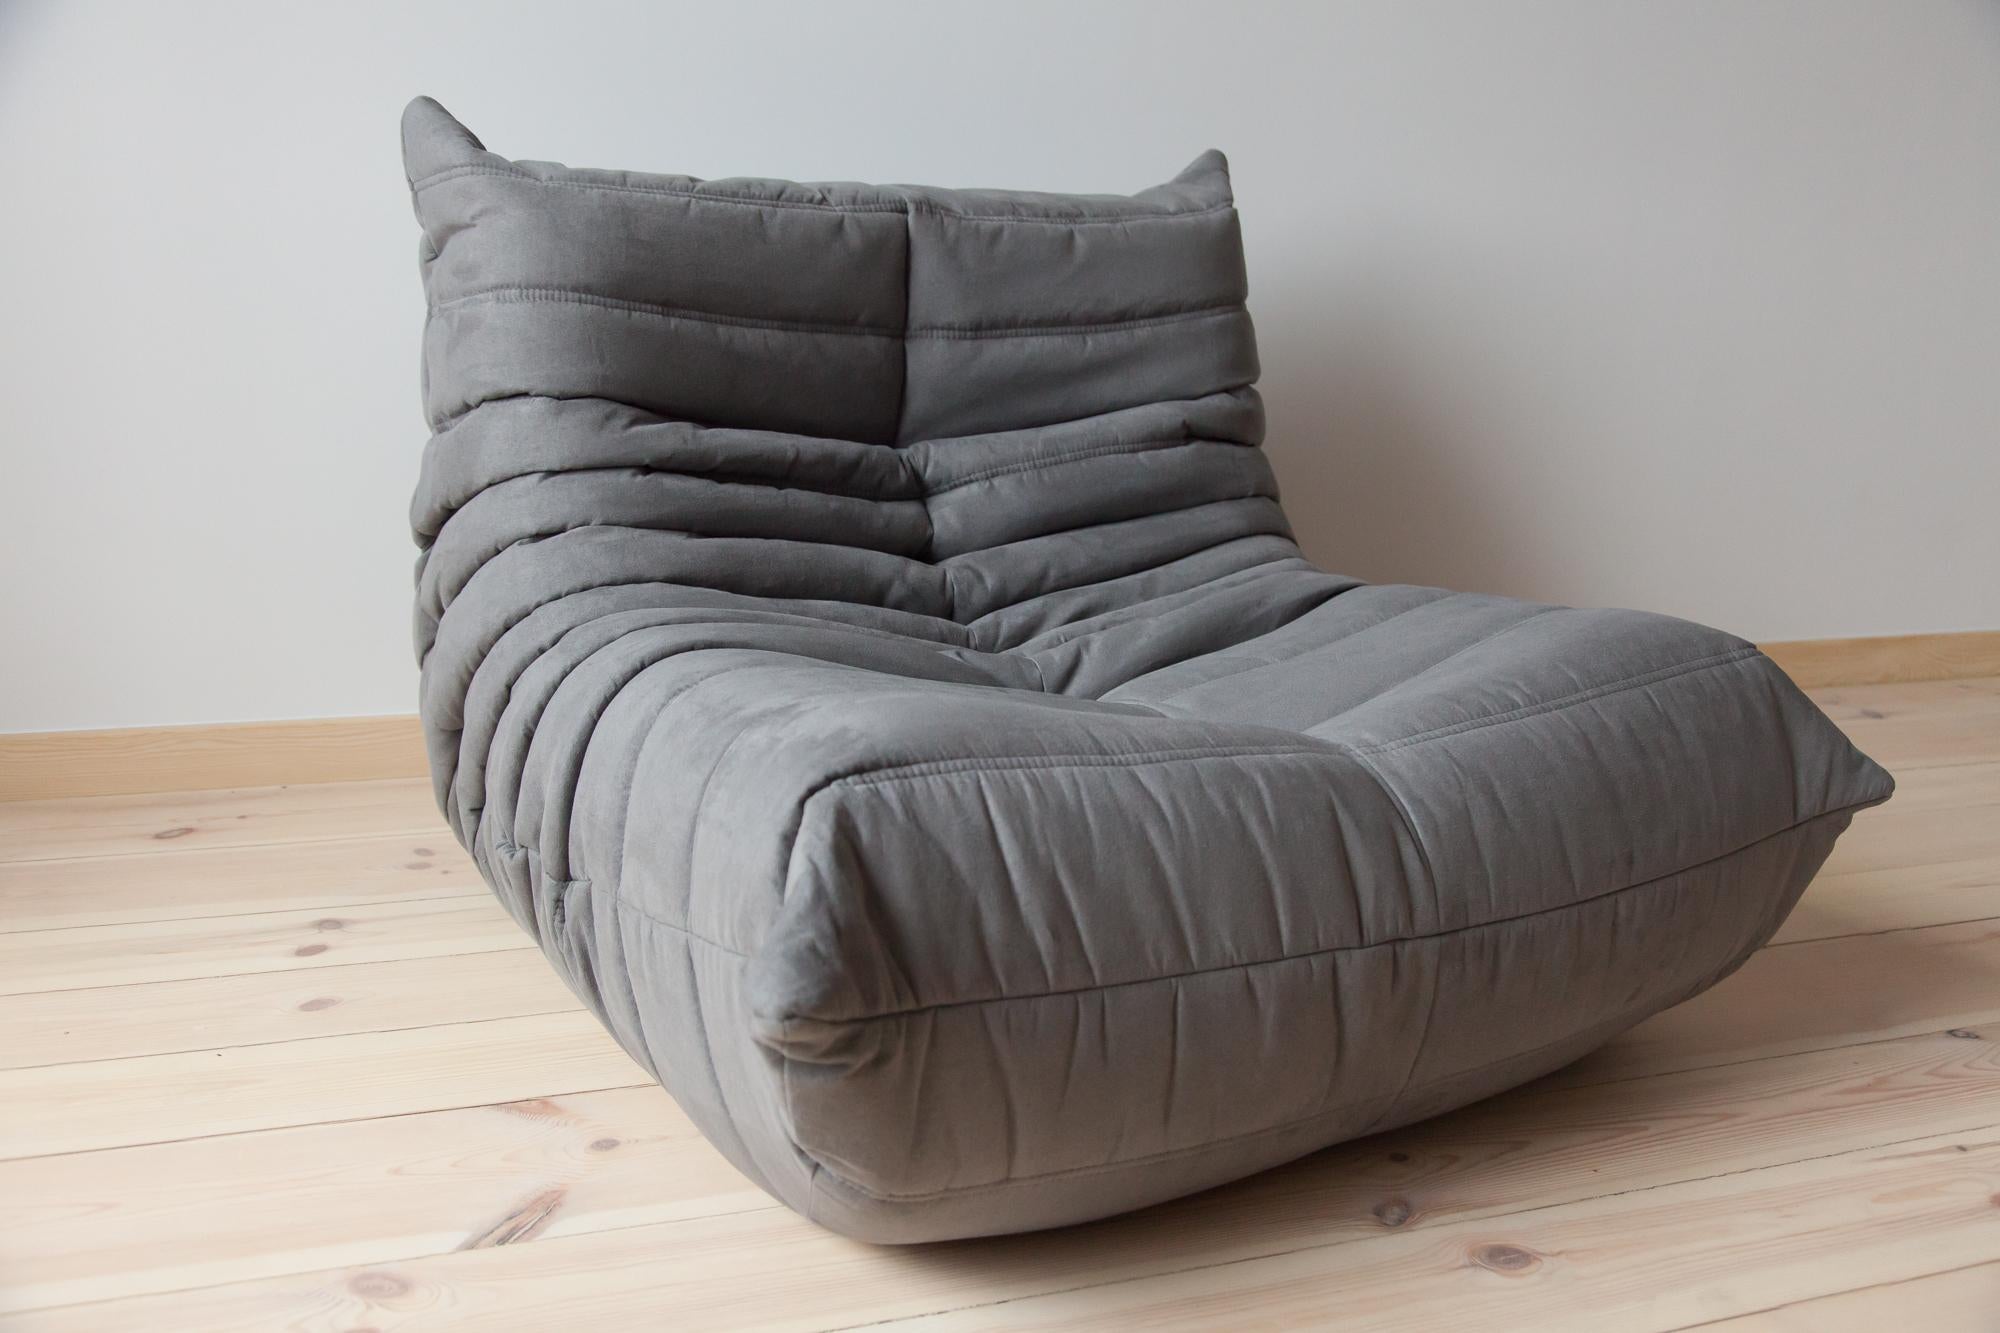 This Togo longue chair was designed by Michel Ducaroy in 1973 and was manufactured by Ligne Roset in France. It has been reupholstered in new grey microfibre (87 x 102 x 70 cm). It has the original Ligne Roset logo and genuine Ligne Roset bottom.